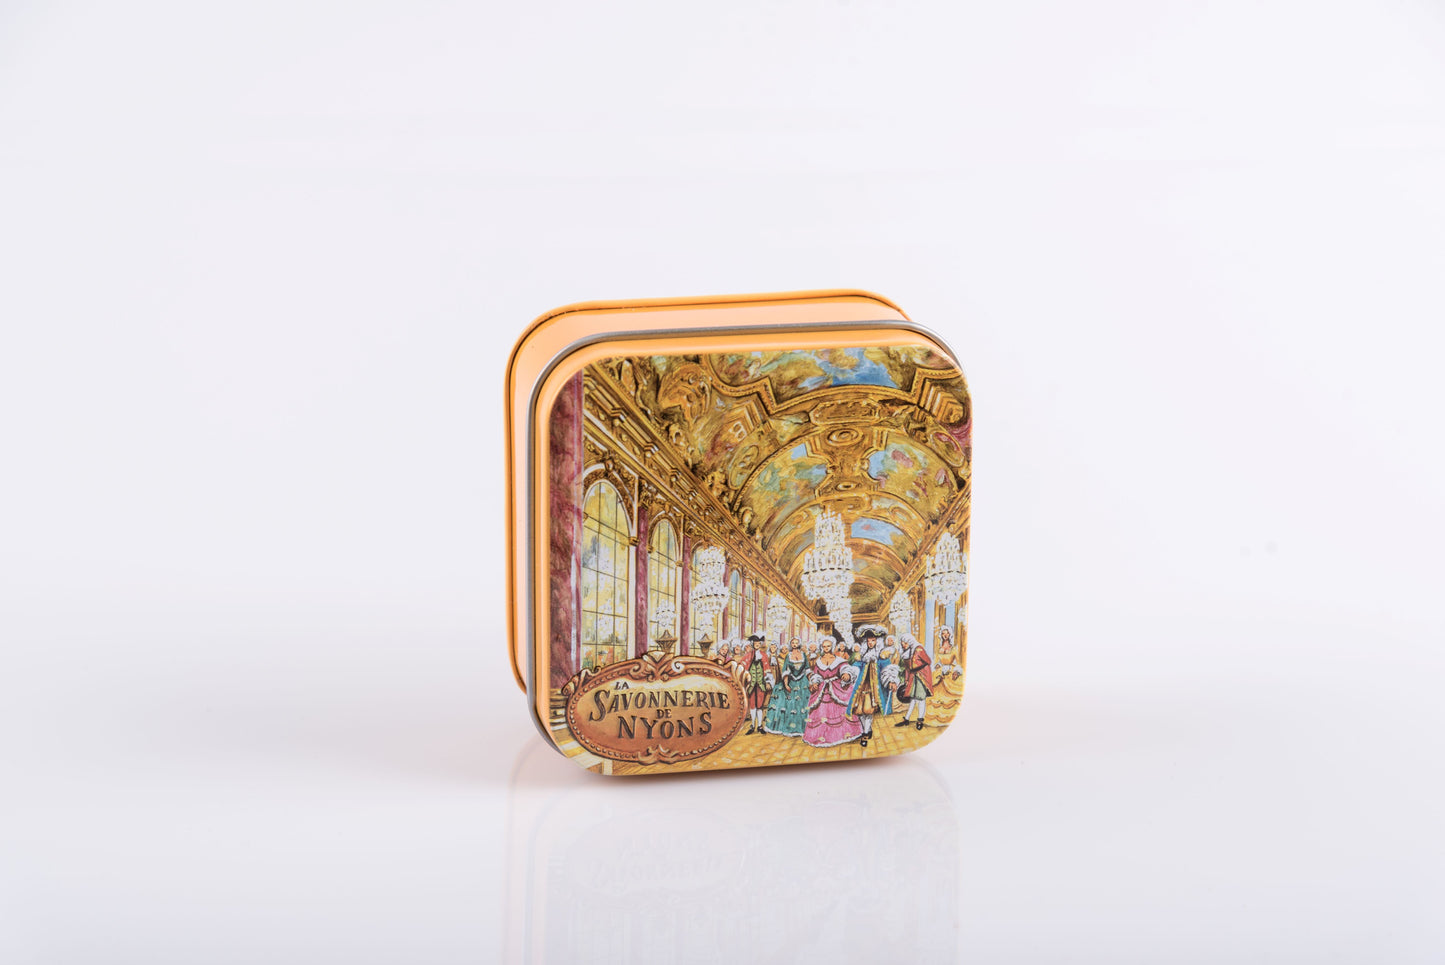 May rose Soap in "The Hall of Mirrors" Tin Box 3.5 oz